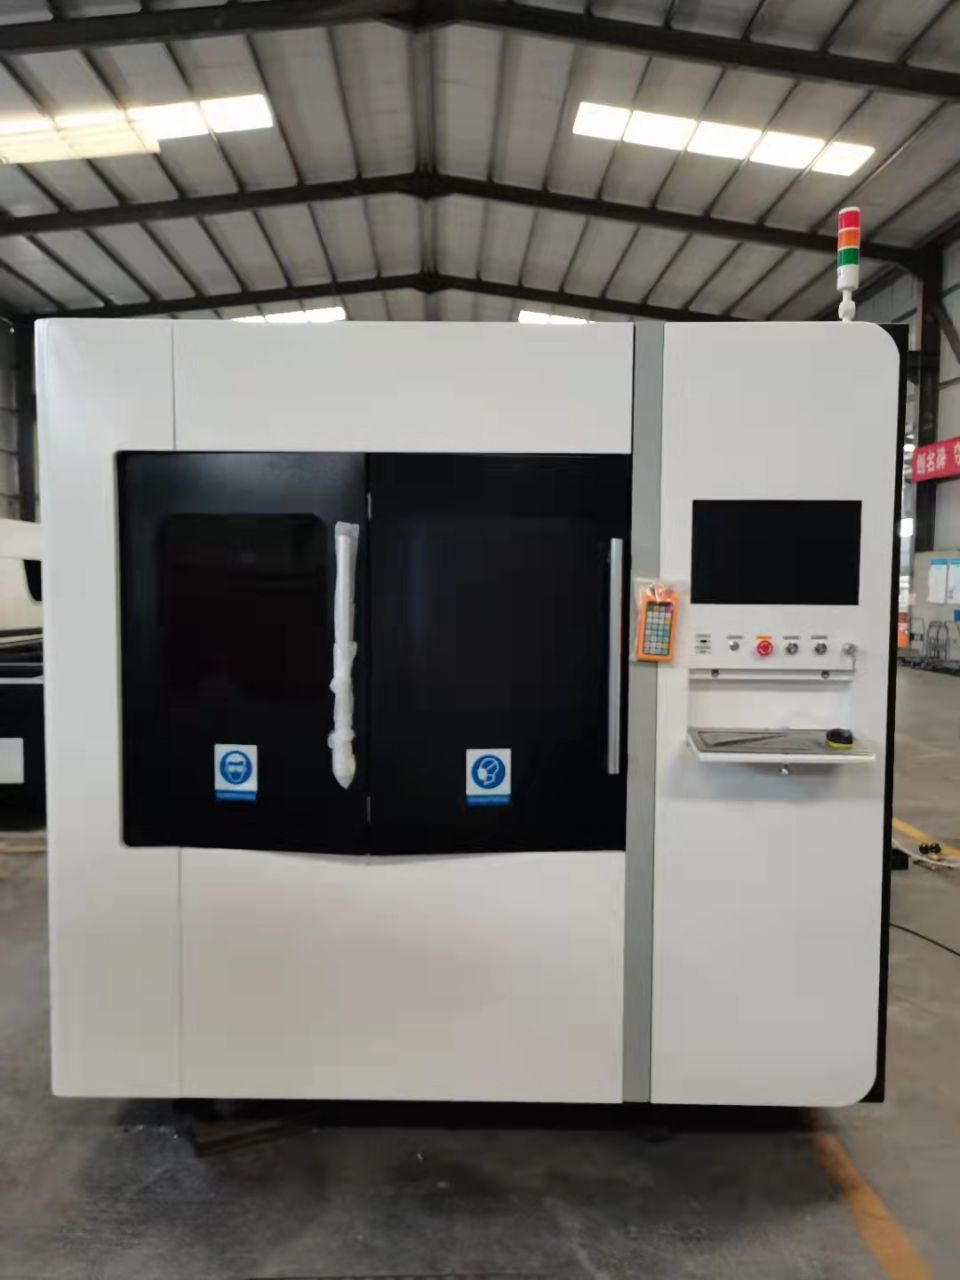  Precise Fiber Laser Cutting Machine for Metal From Argus 